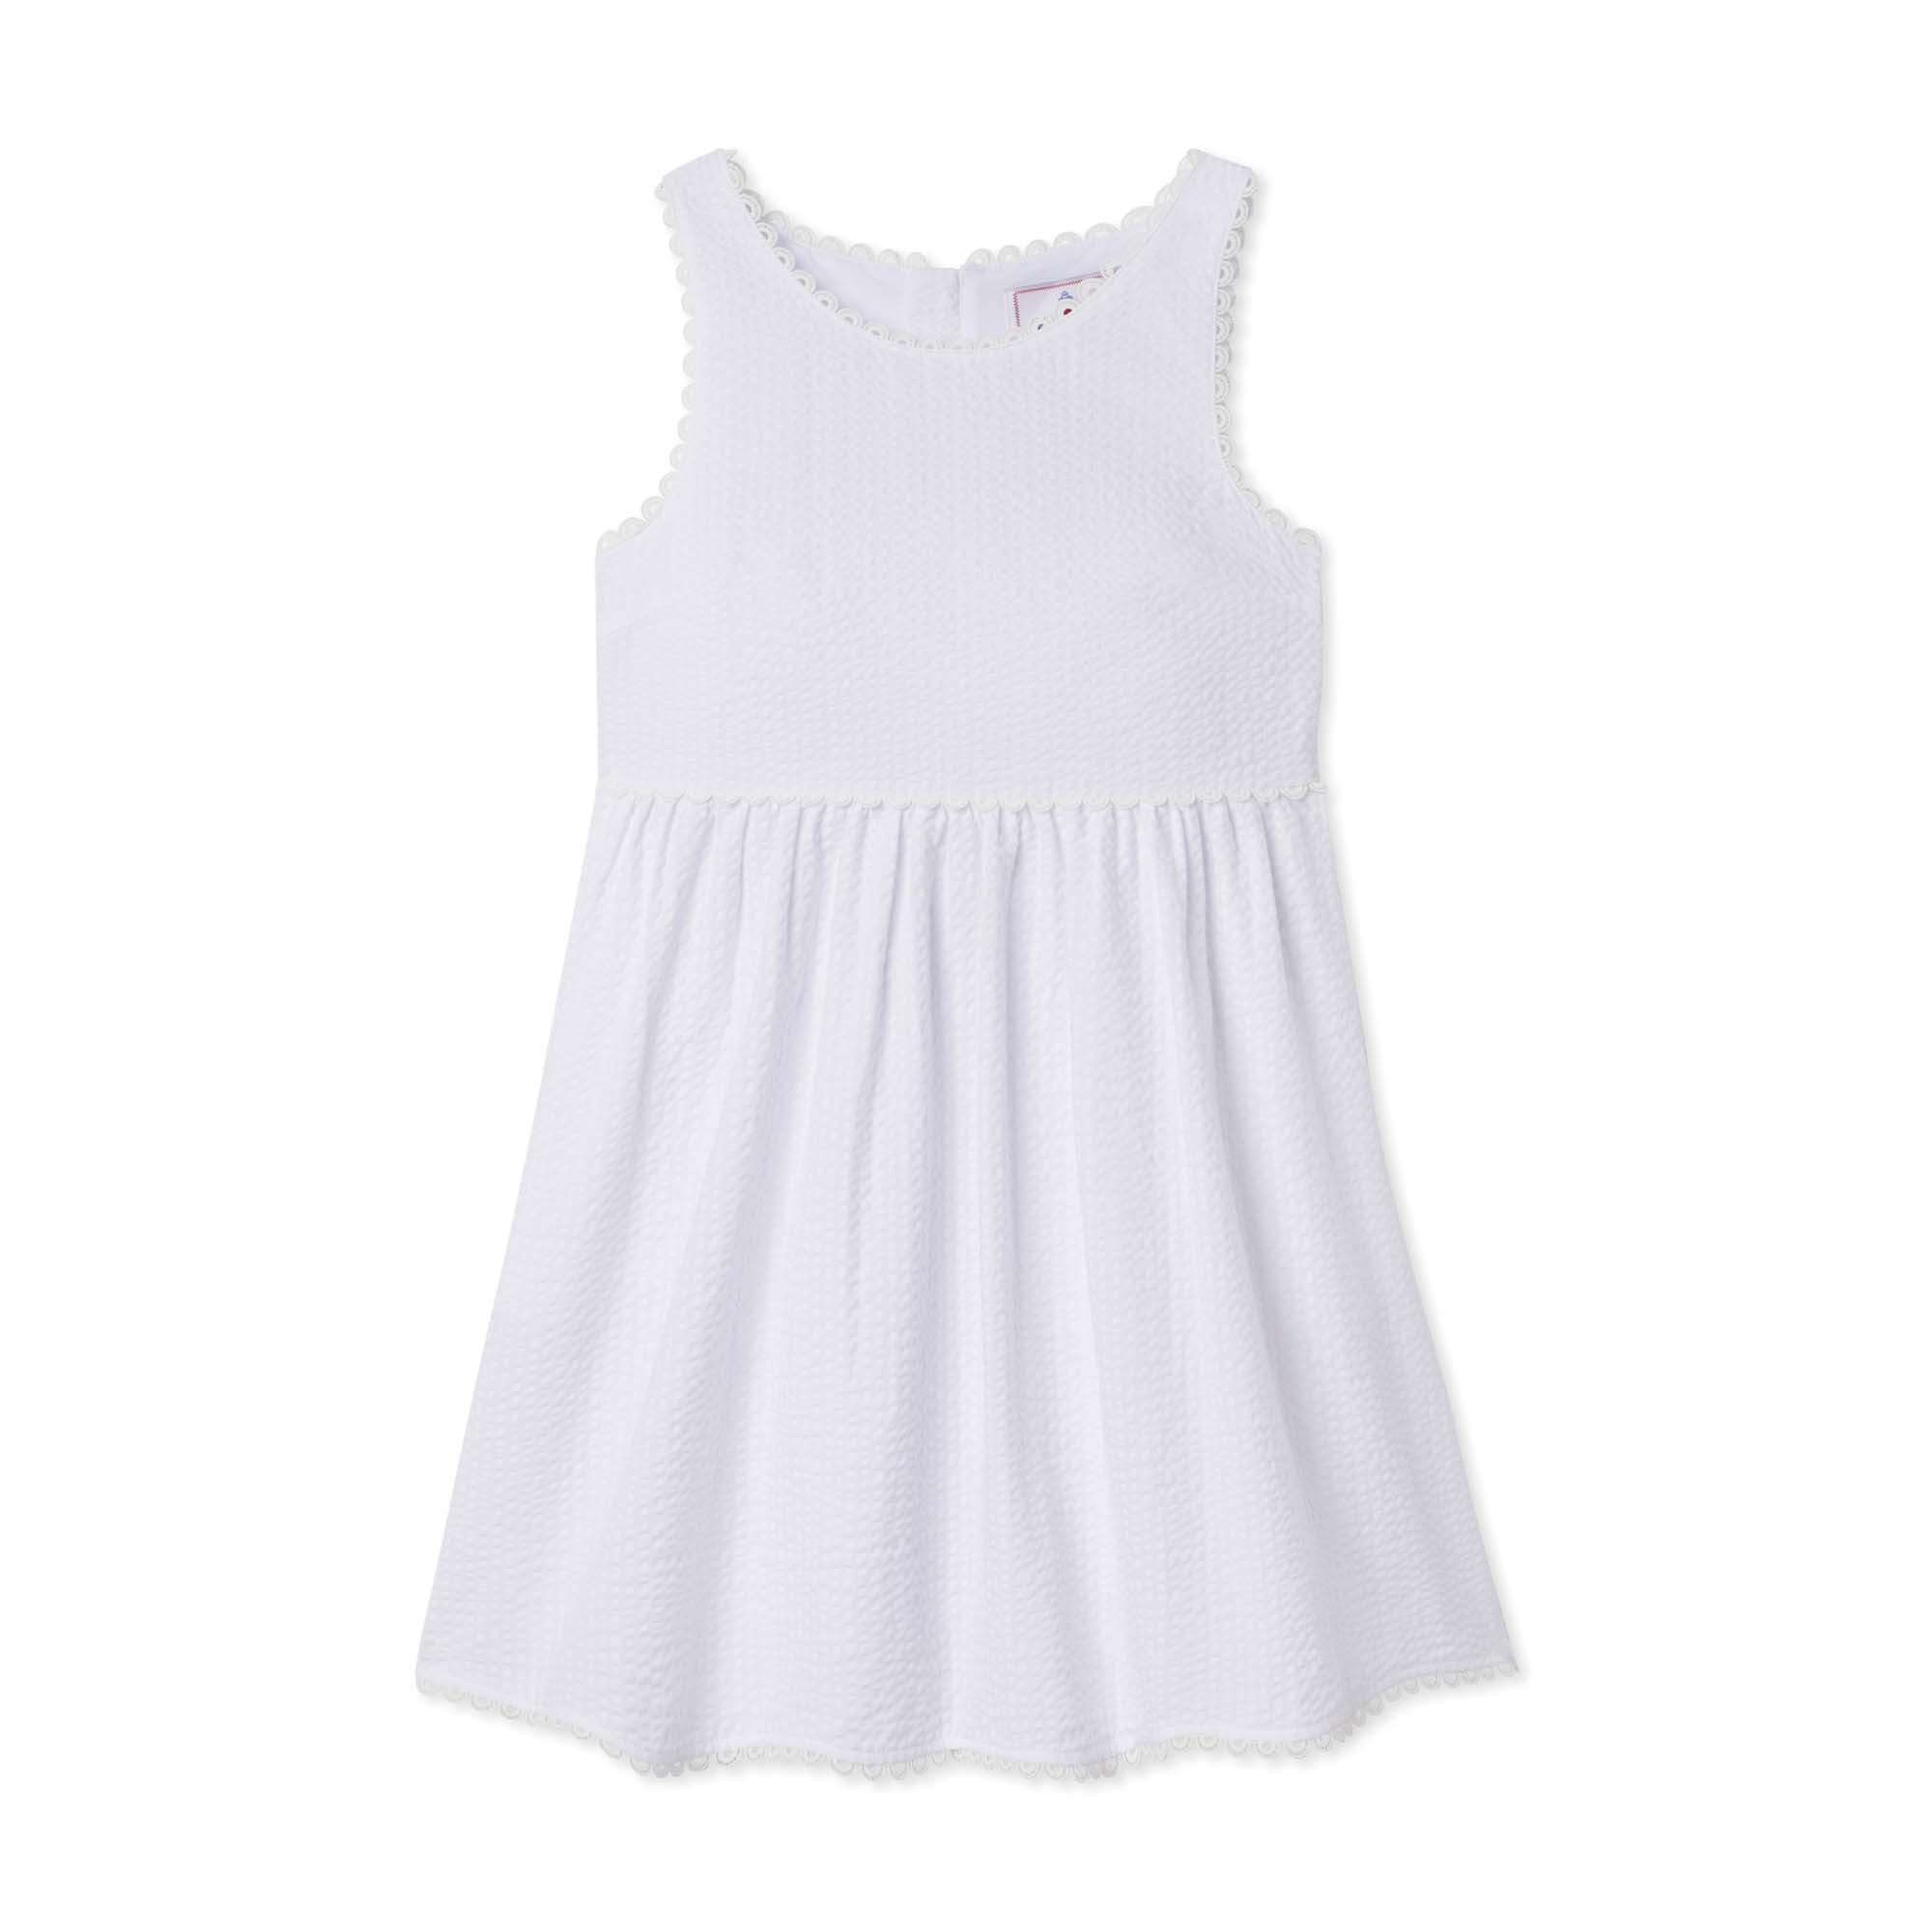 Classic and Preppy Charlotte Dress, White Seersucker-Dresses, Jumpsuits and Rompers-Bright White on Bright White Seersucker-5Y-CPC - Classic Prep Childrenswear